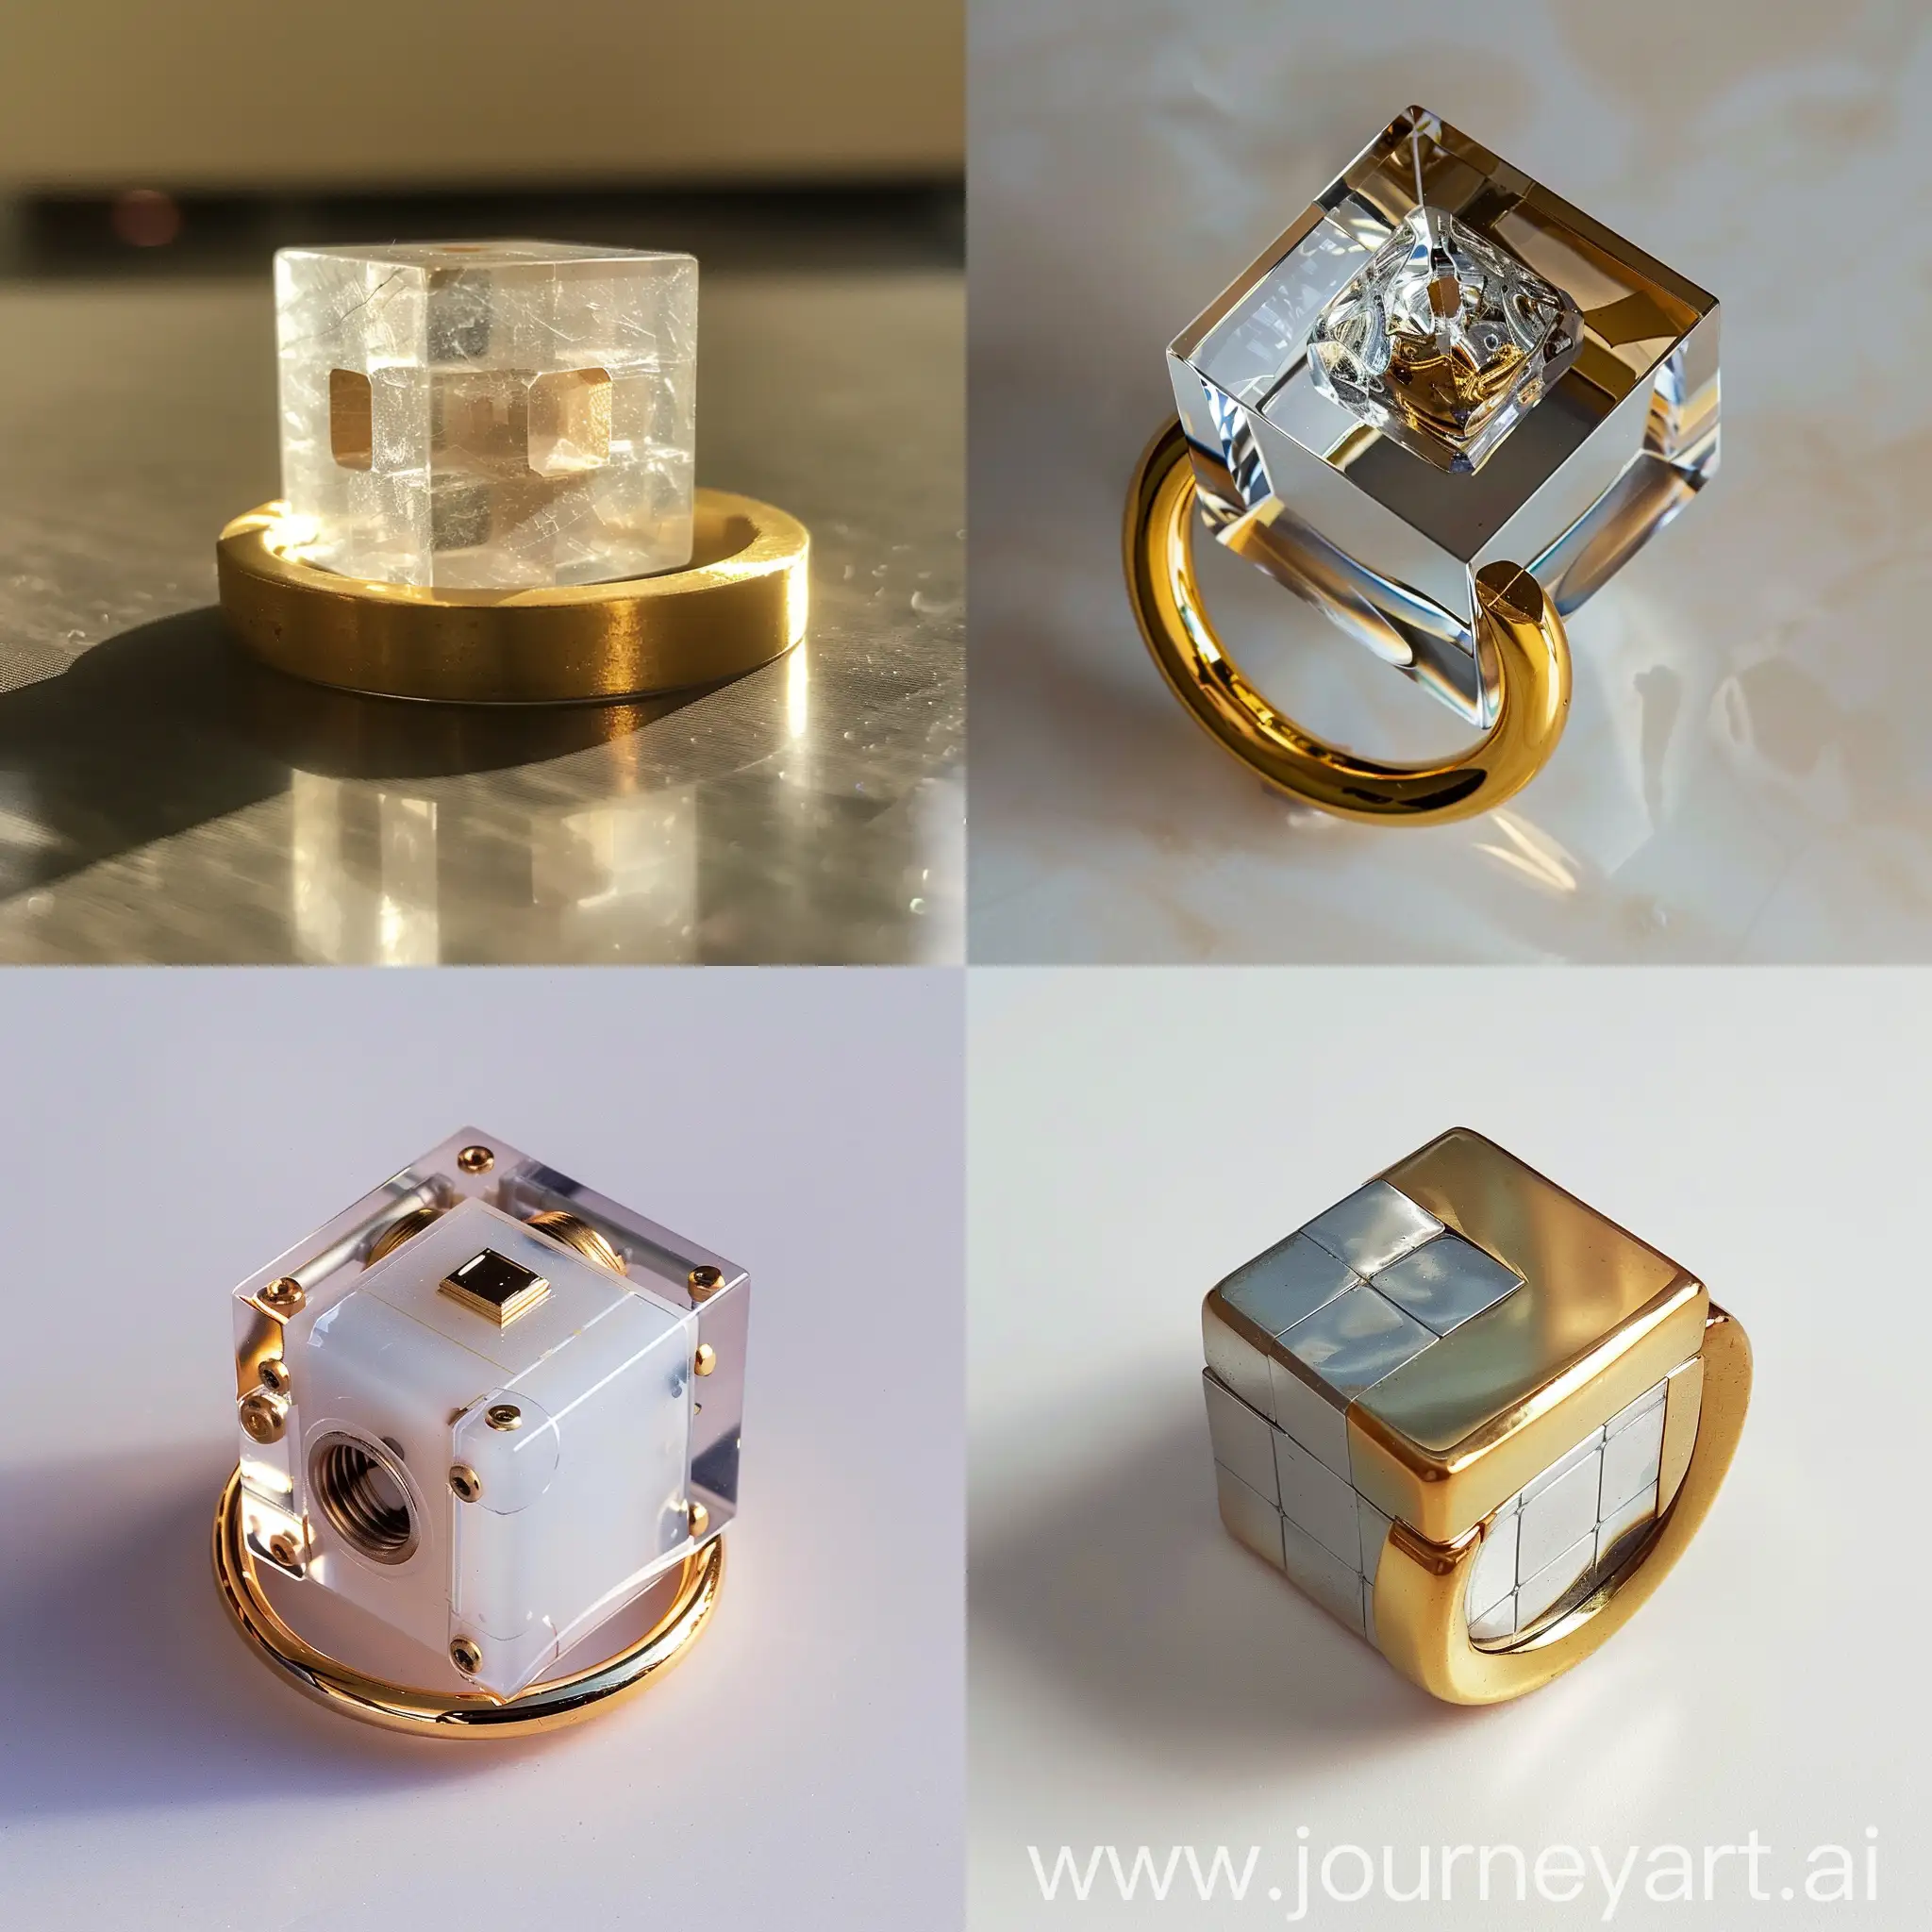 A cube on a gold ring which any side of 4 sides of the cube has a face mode